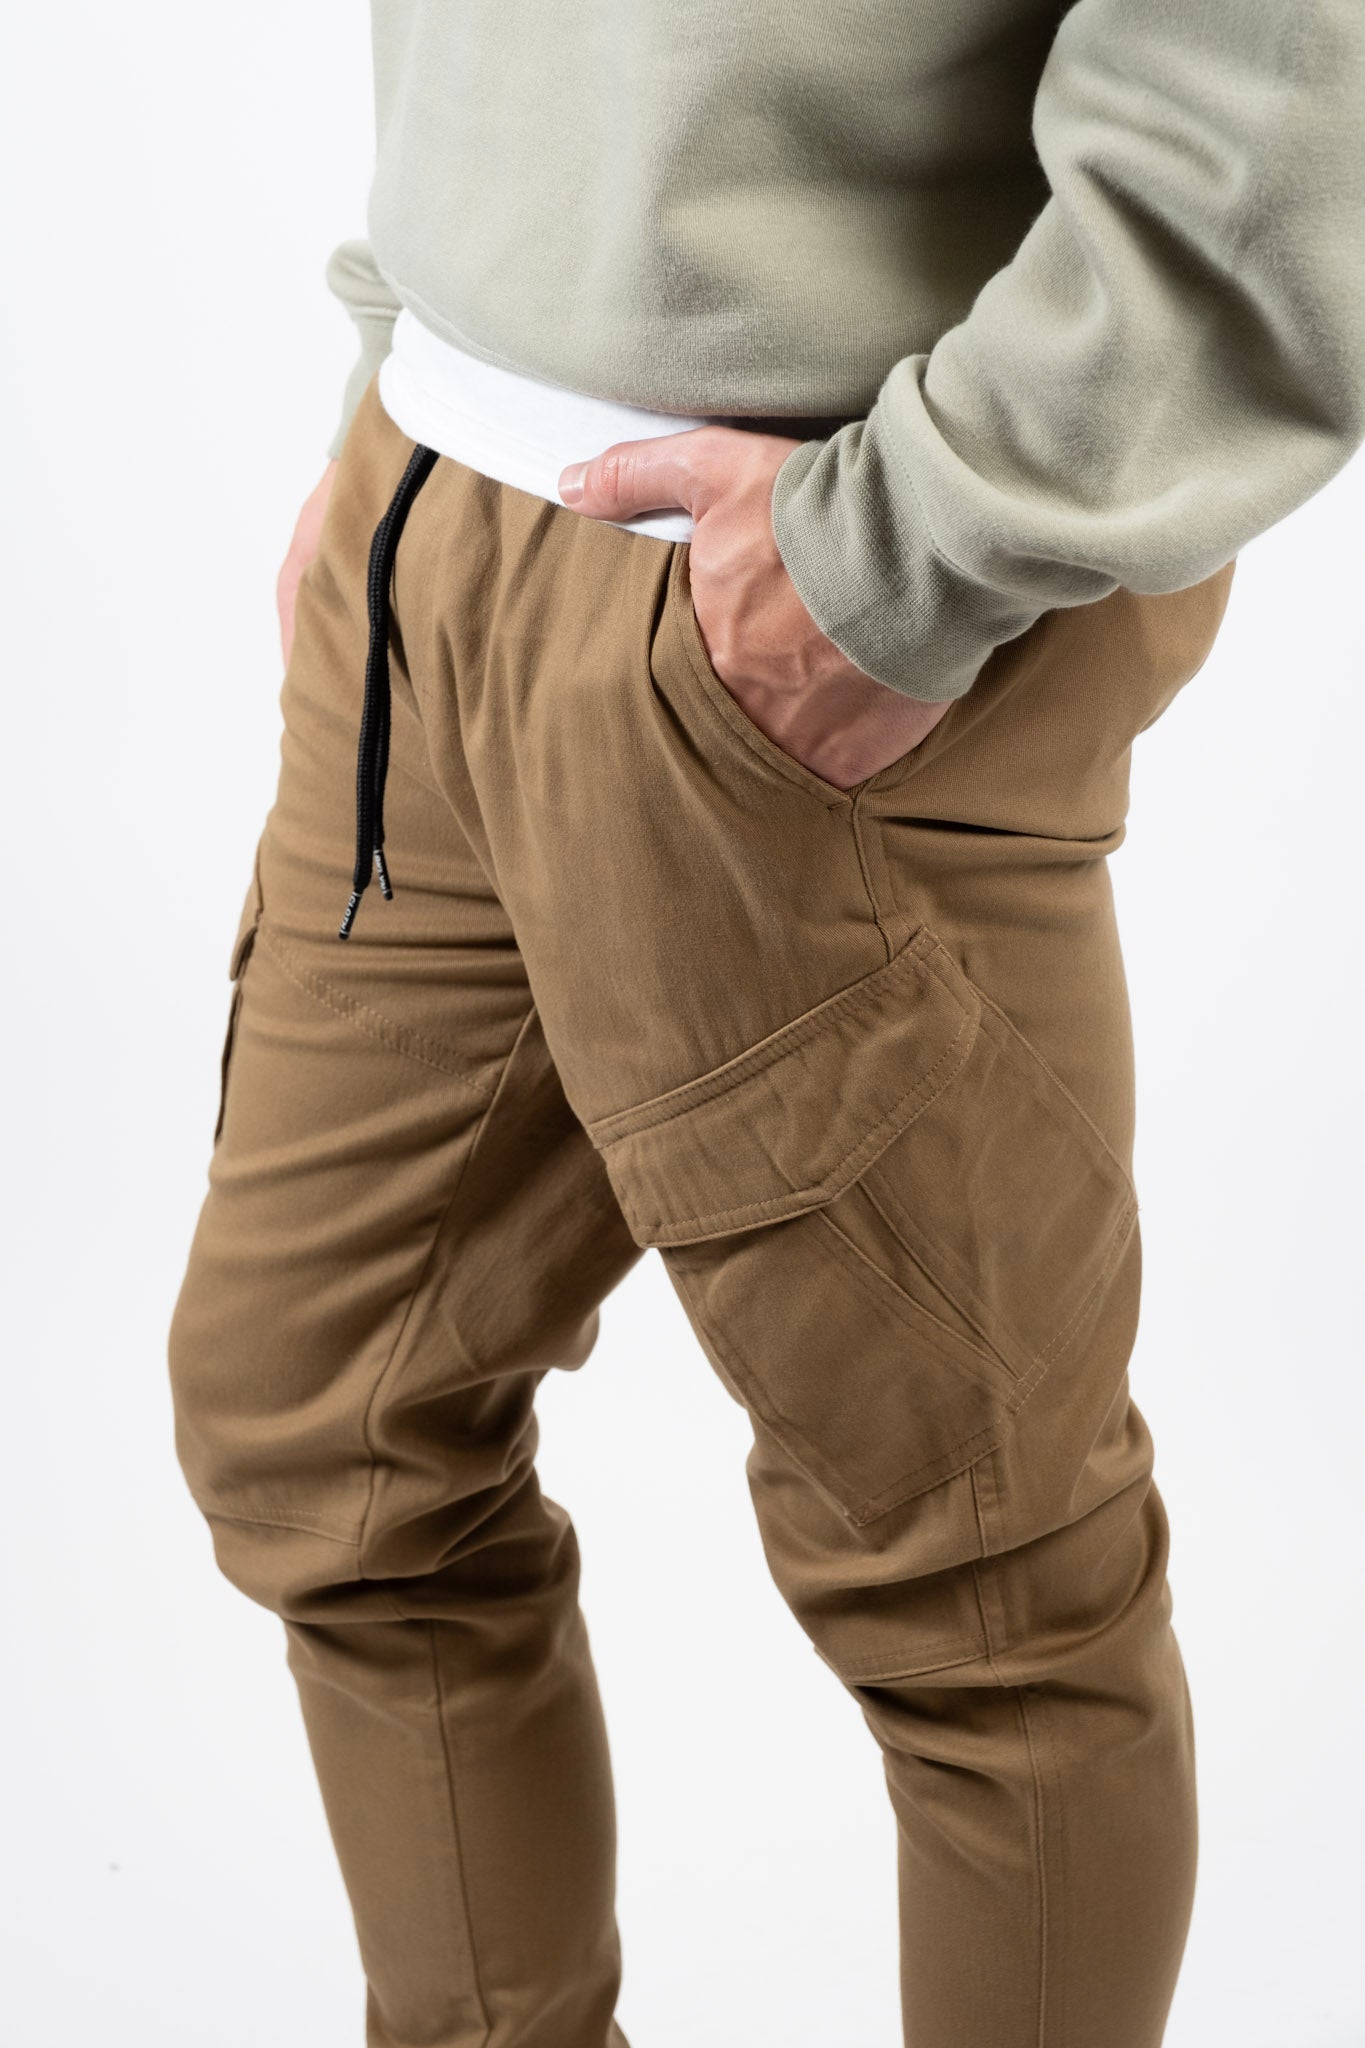 Buy Heavy Weight Cargo Pocket Stretch Twill Jogger Pants (8-18) Boys  Bottoms from Arcade Styles. Find Arcade Styles fashion & more at